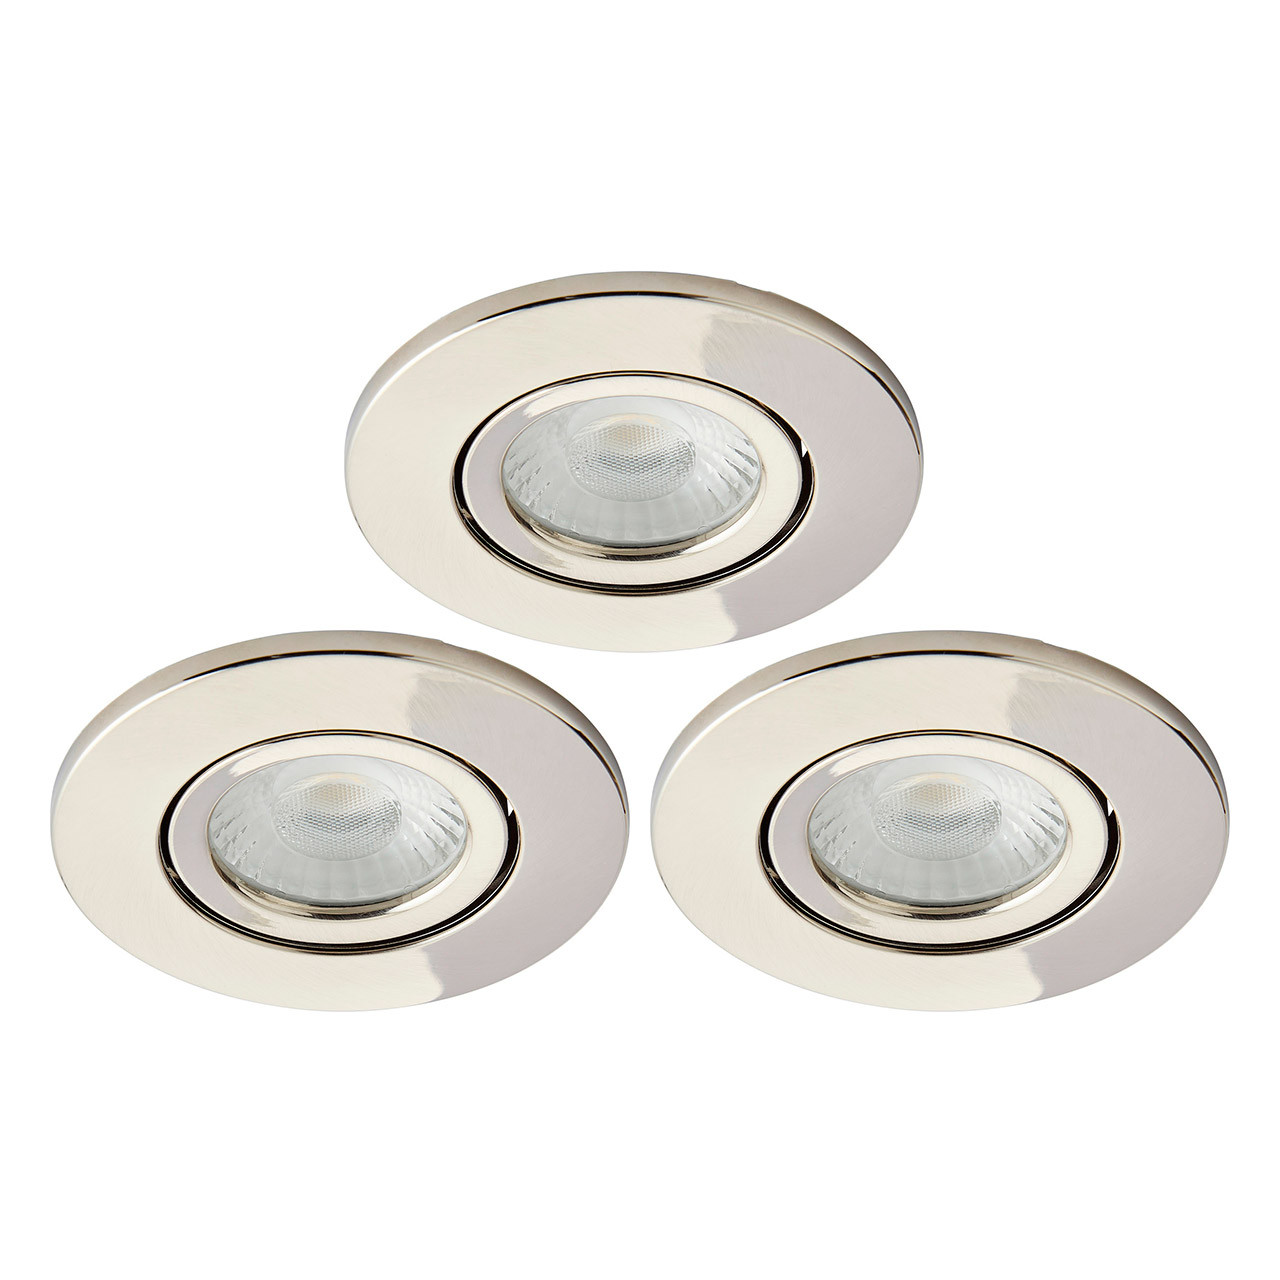 Photos - Chandelier / Lamp SPA Como LED Tiltable Fire Rated Downlight 5W Dimmable 3-Pack Cool White S 